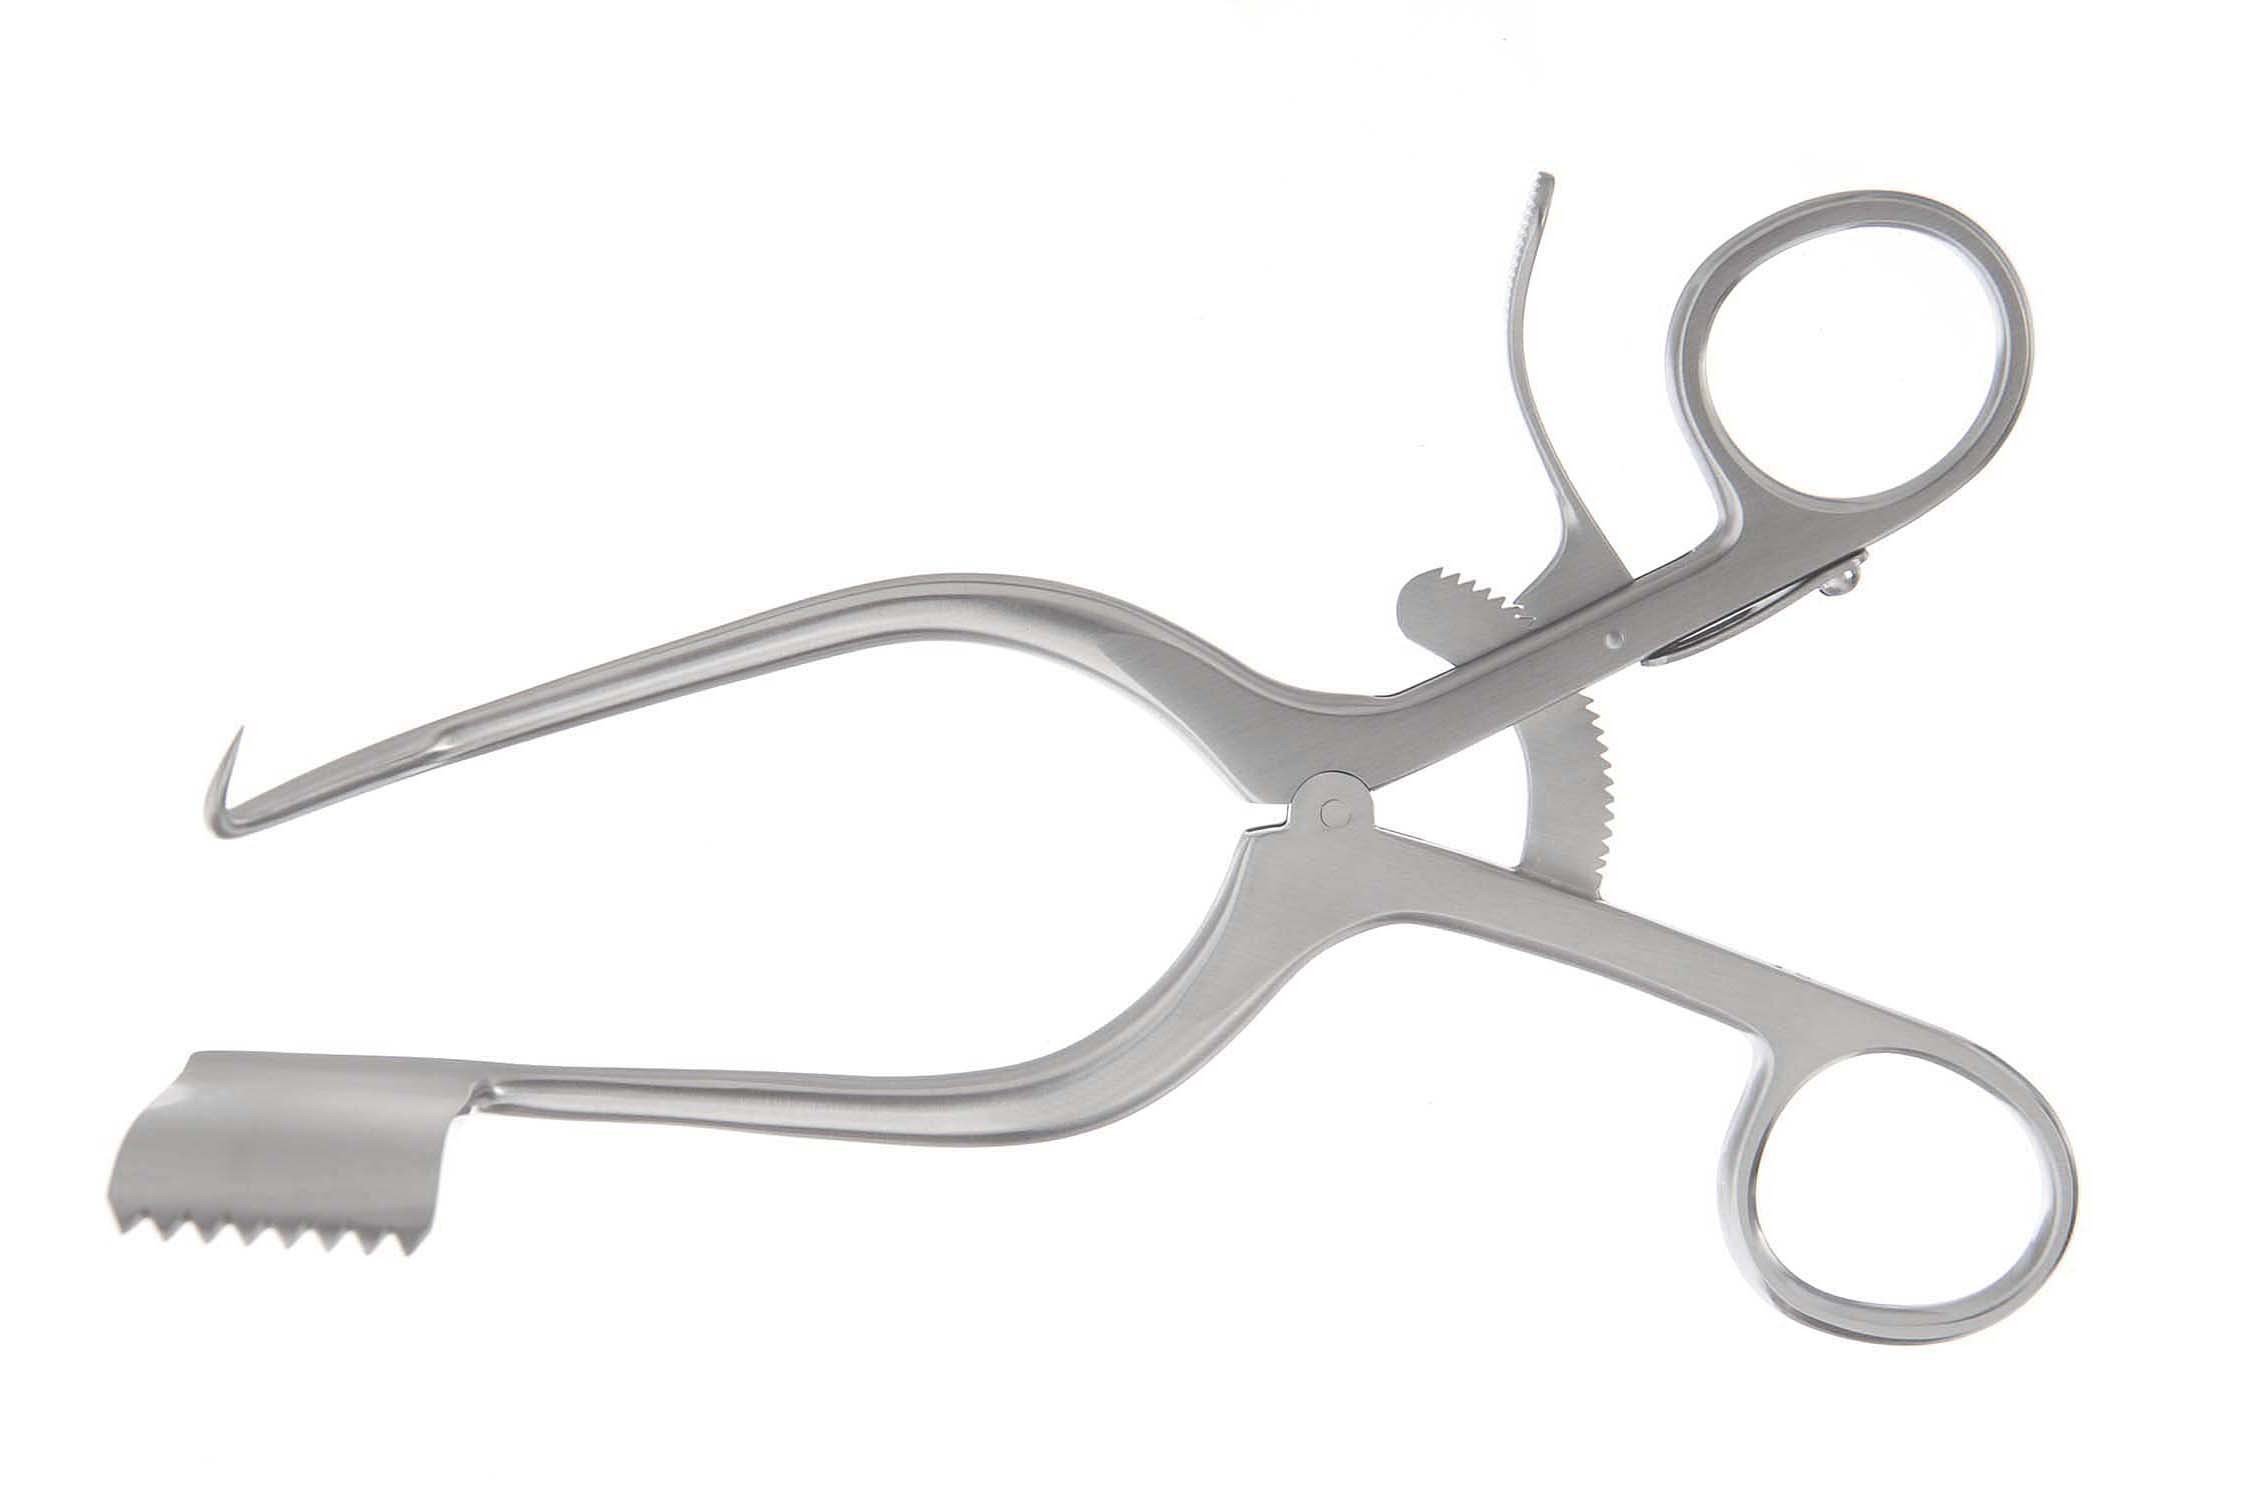 Meyerding Laminectomy Retractor, Blades W/ Toothed Edges, 7 1/8" (18.0 Cm), Blades 1" X 1 1/8" (25.0 Mm X 30.0 Mm)